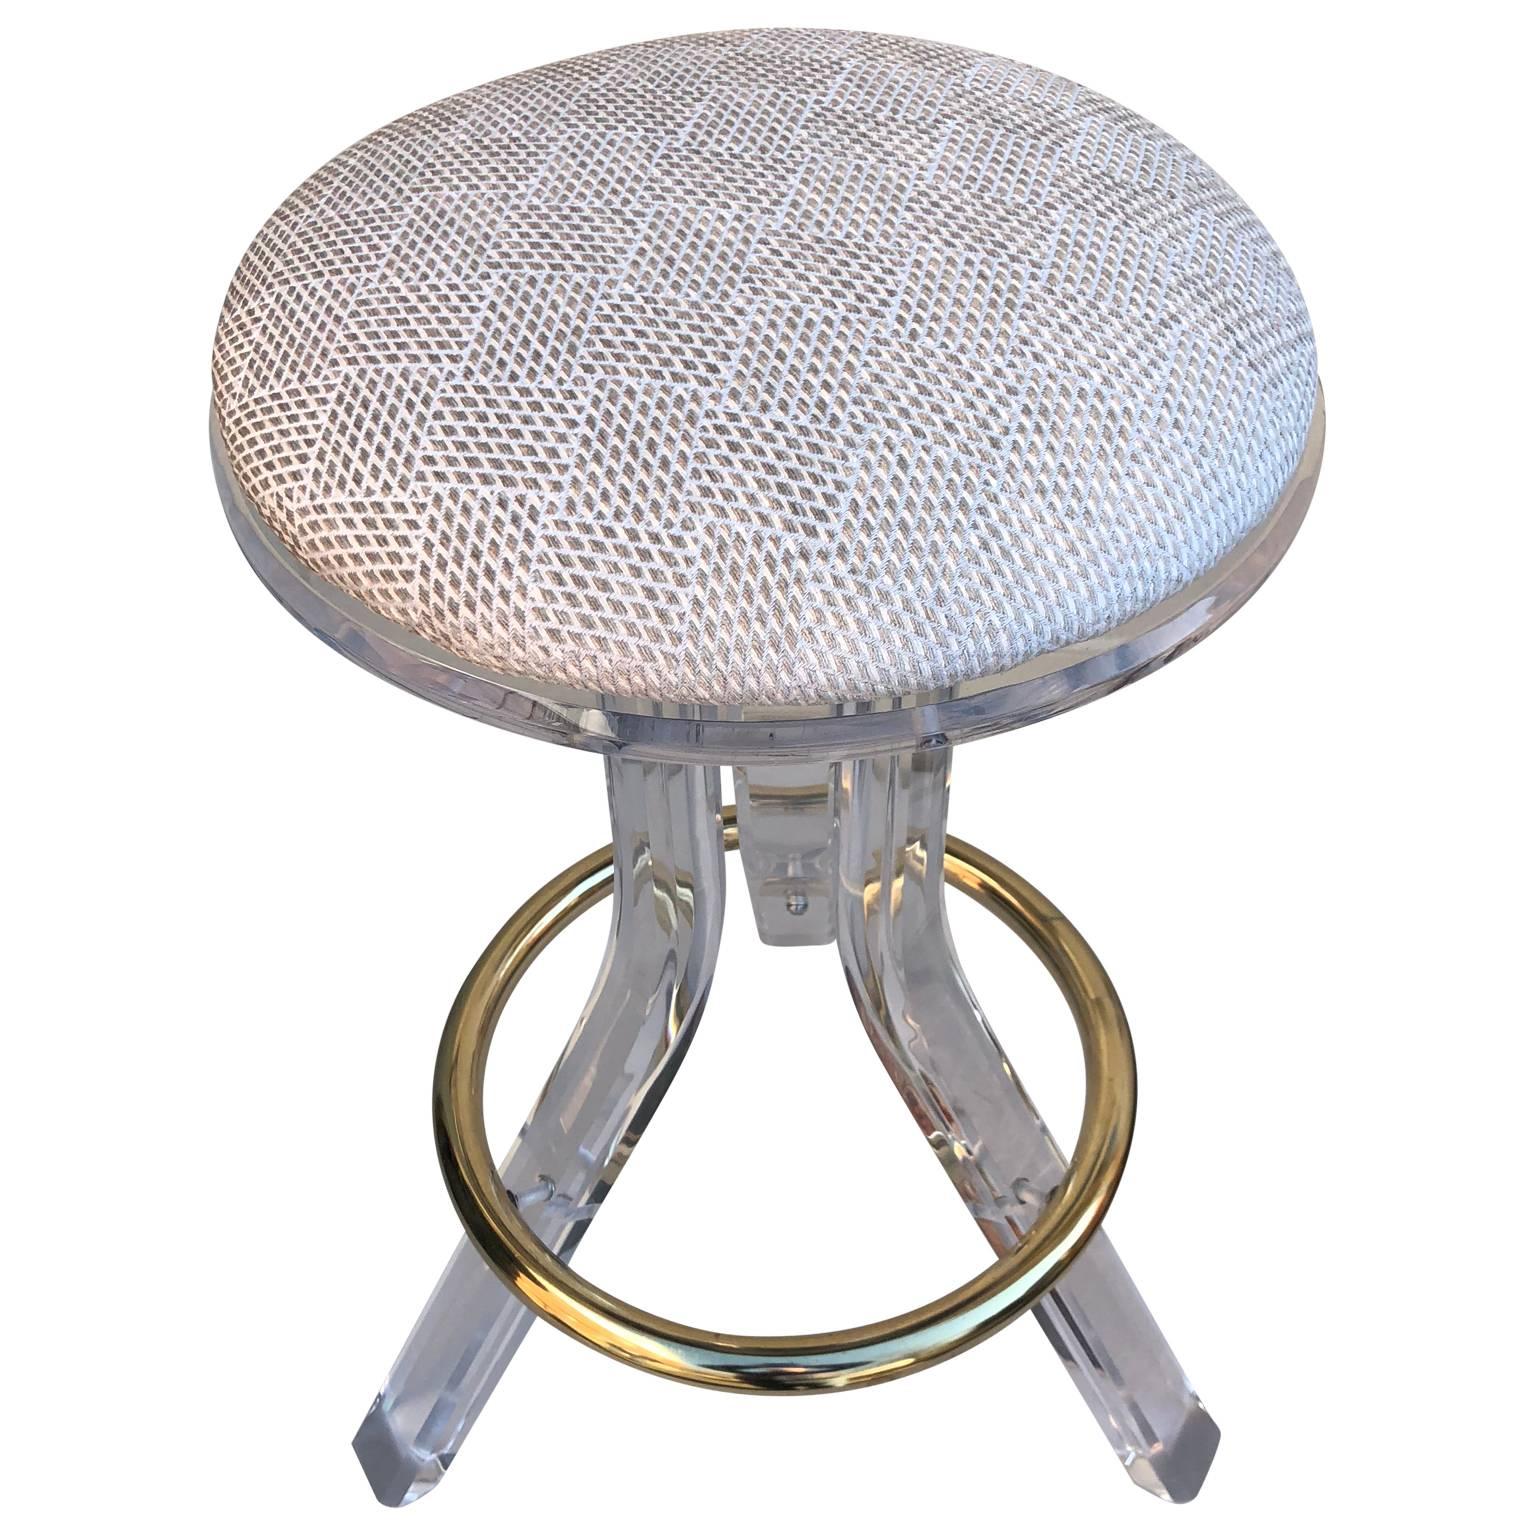 Single 1970s Lucite vanity stool with brass foot rest